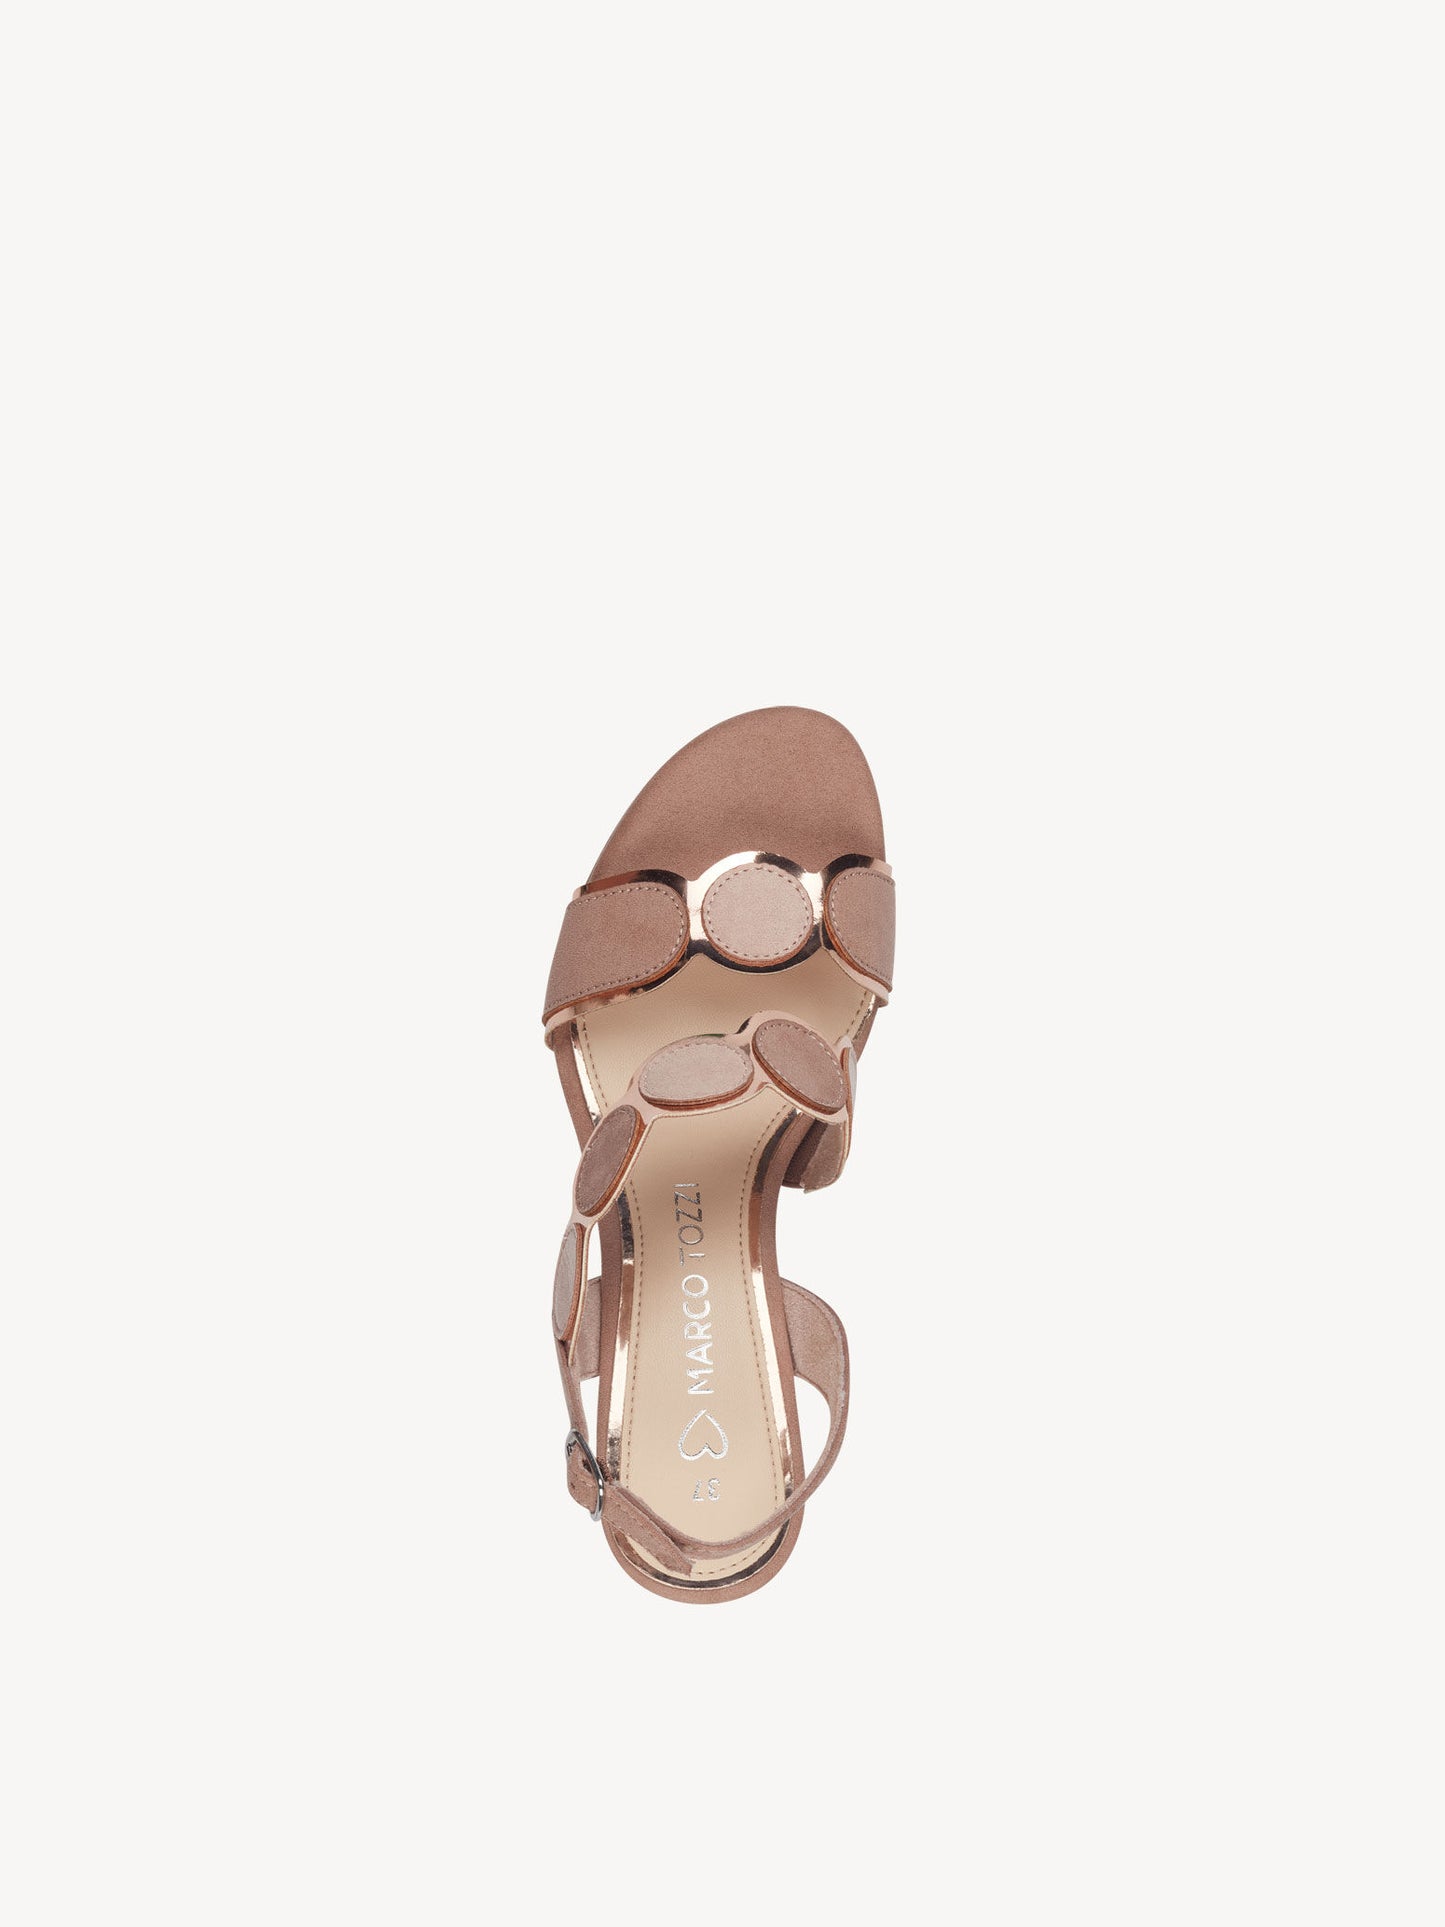 Marco Tozzi Nude and Rose Gold Healed Sandal